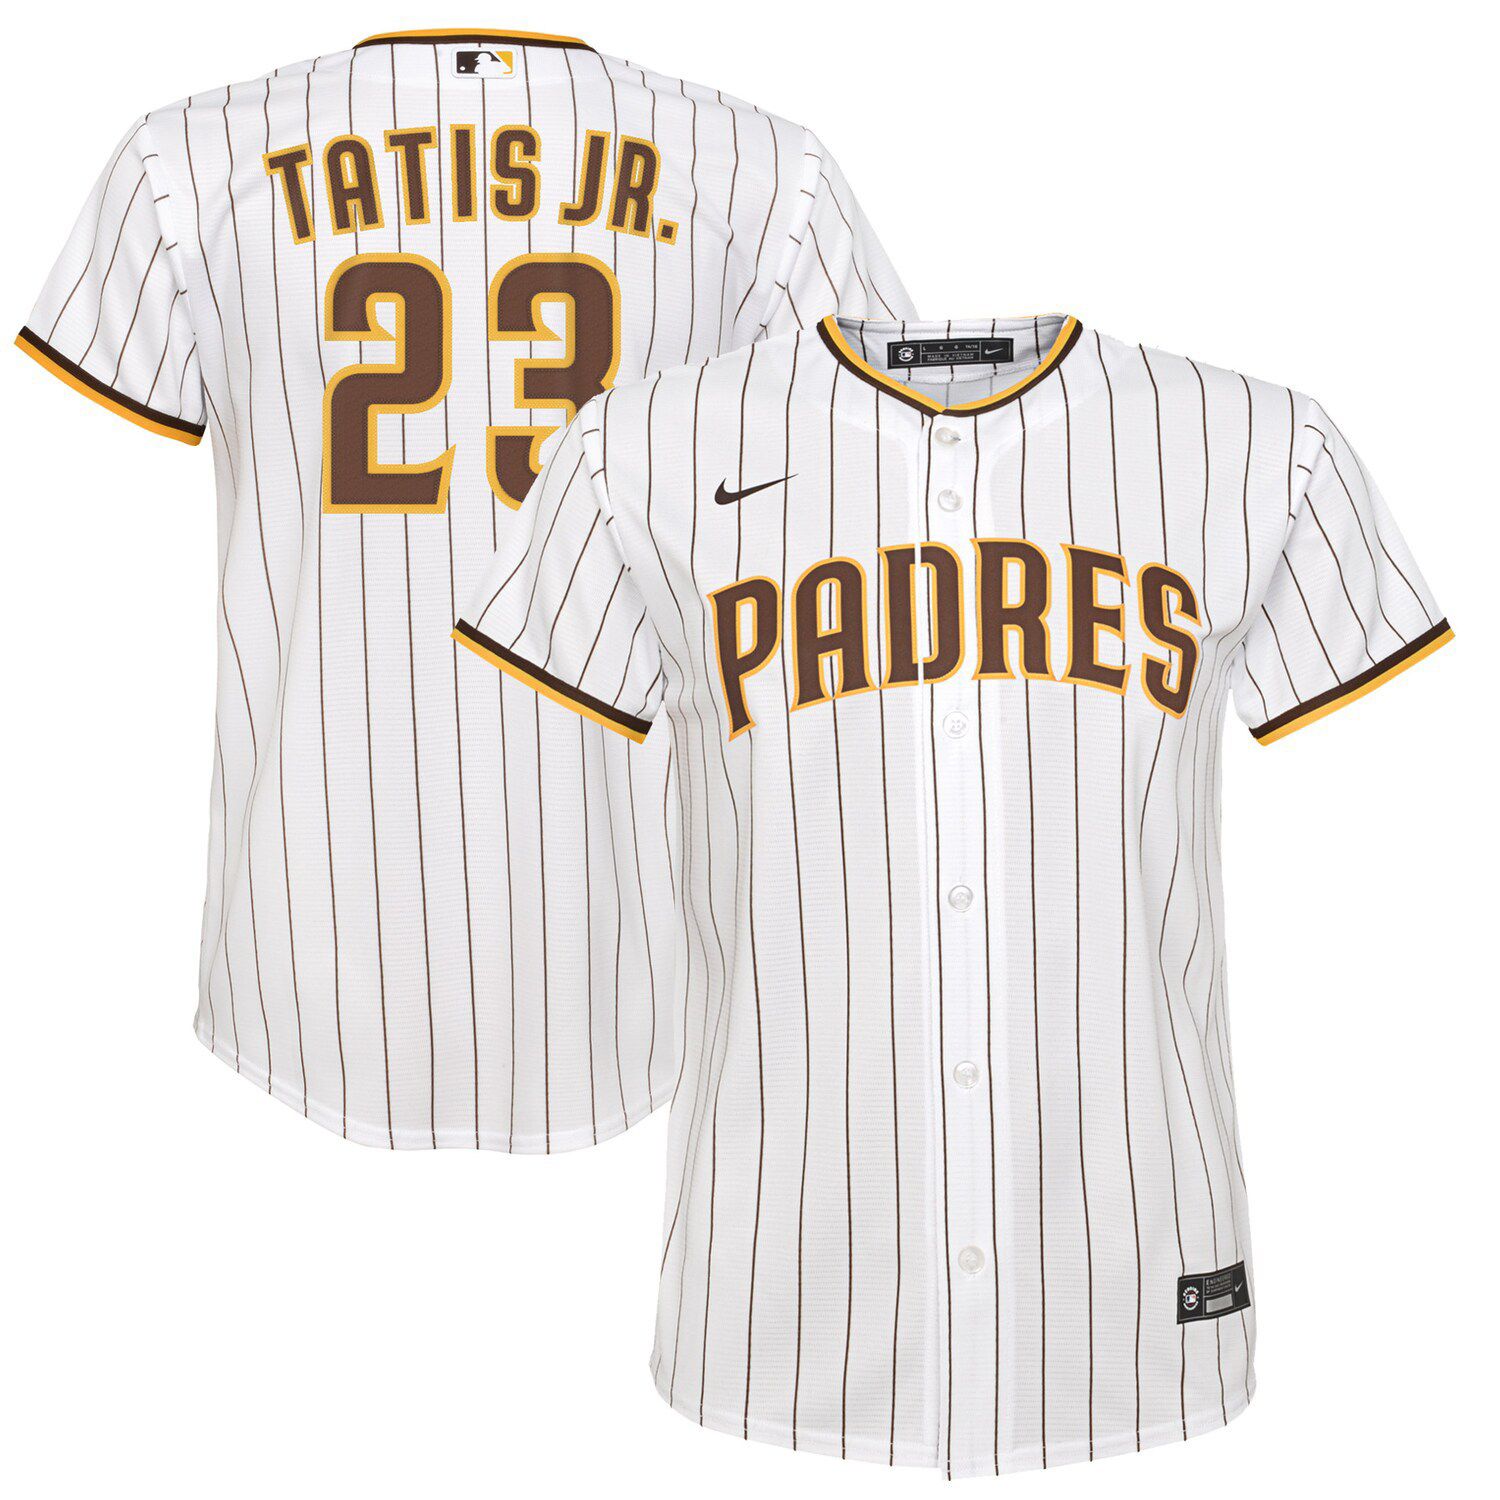 padres home jersey 2020